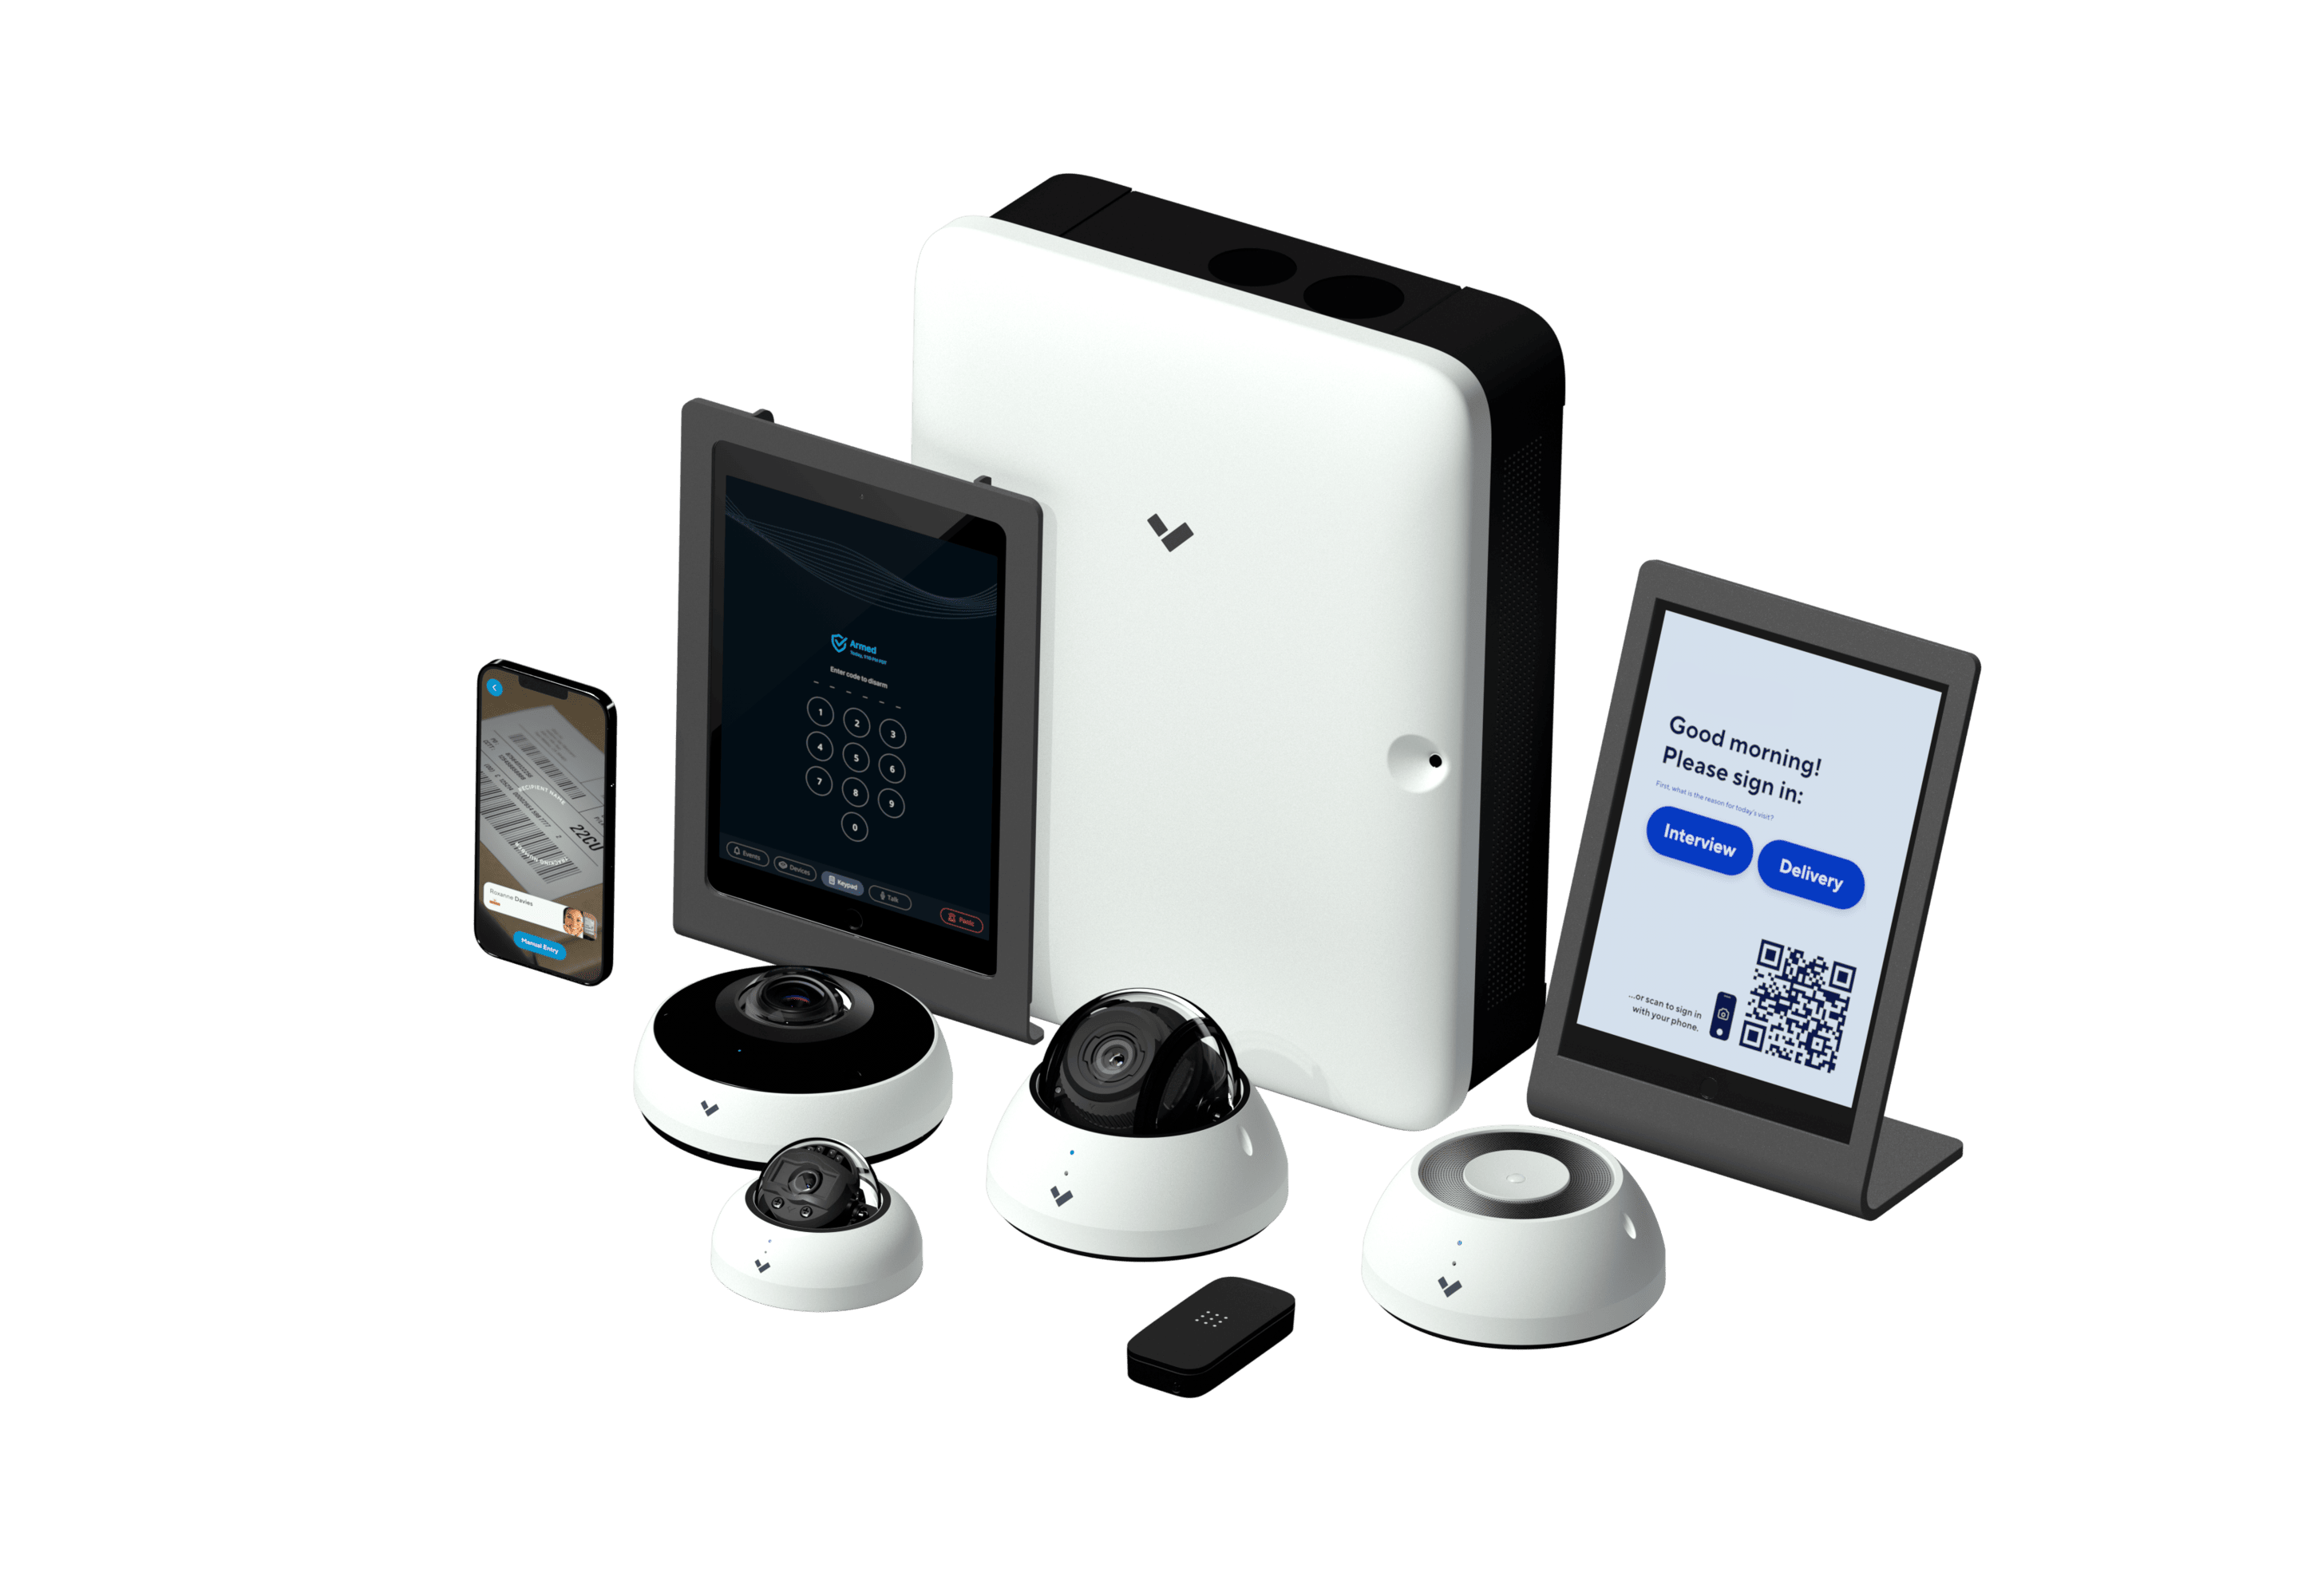 Verkada device family with cameras for face detection live video